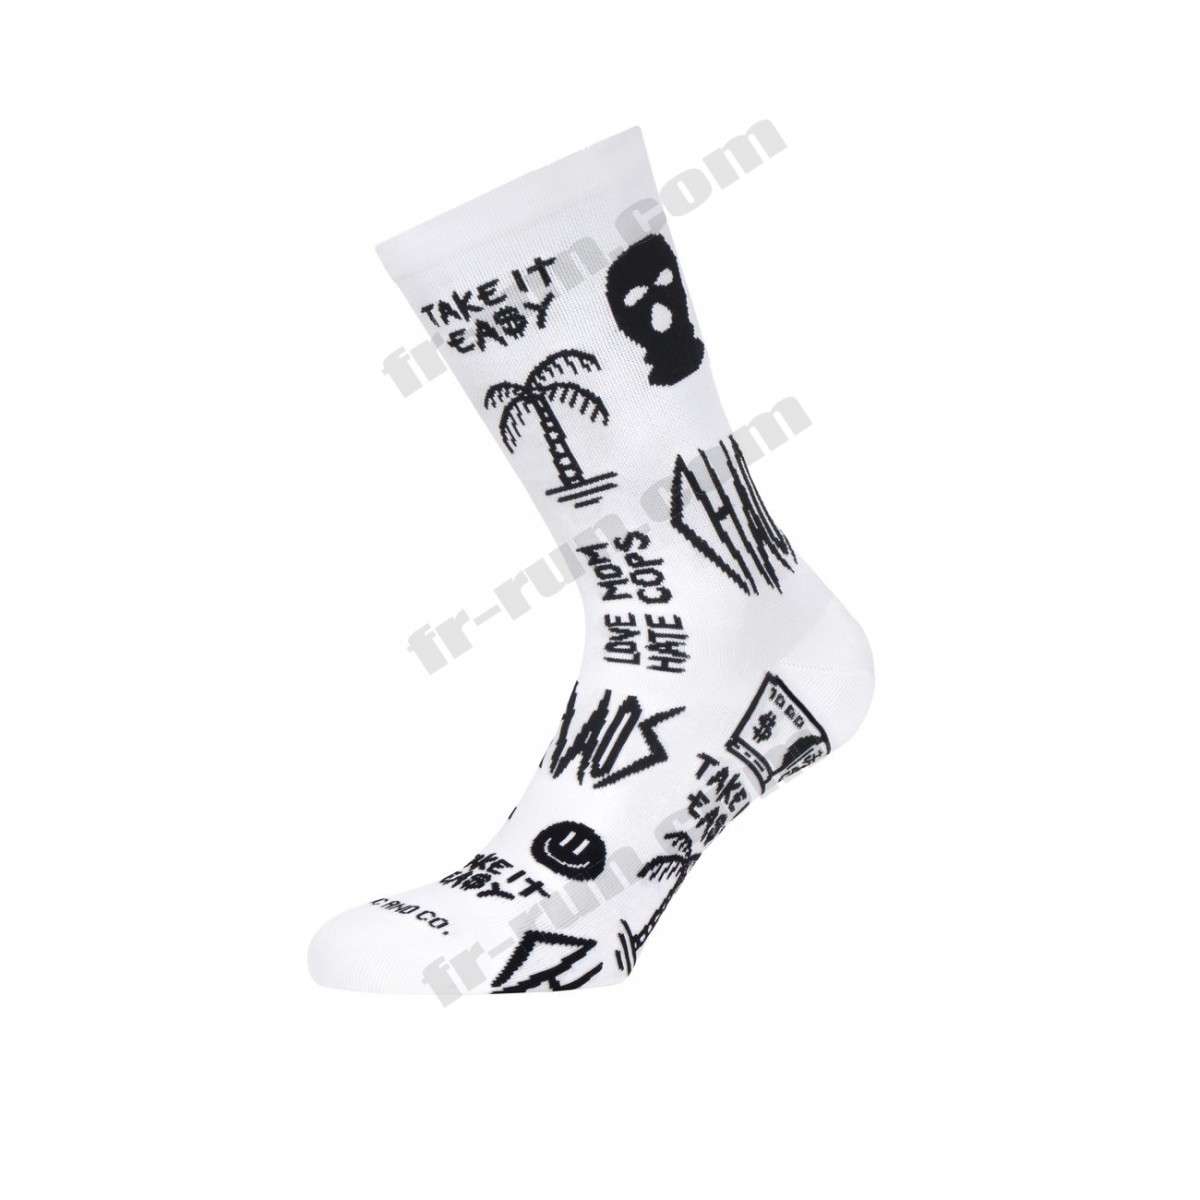 Pacific And Co/running adulte PACIFIC and CO MIAMI VICE Unisex Performance Socks ◇◇◇ Pas Cher Du Tout - -0